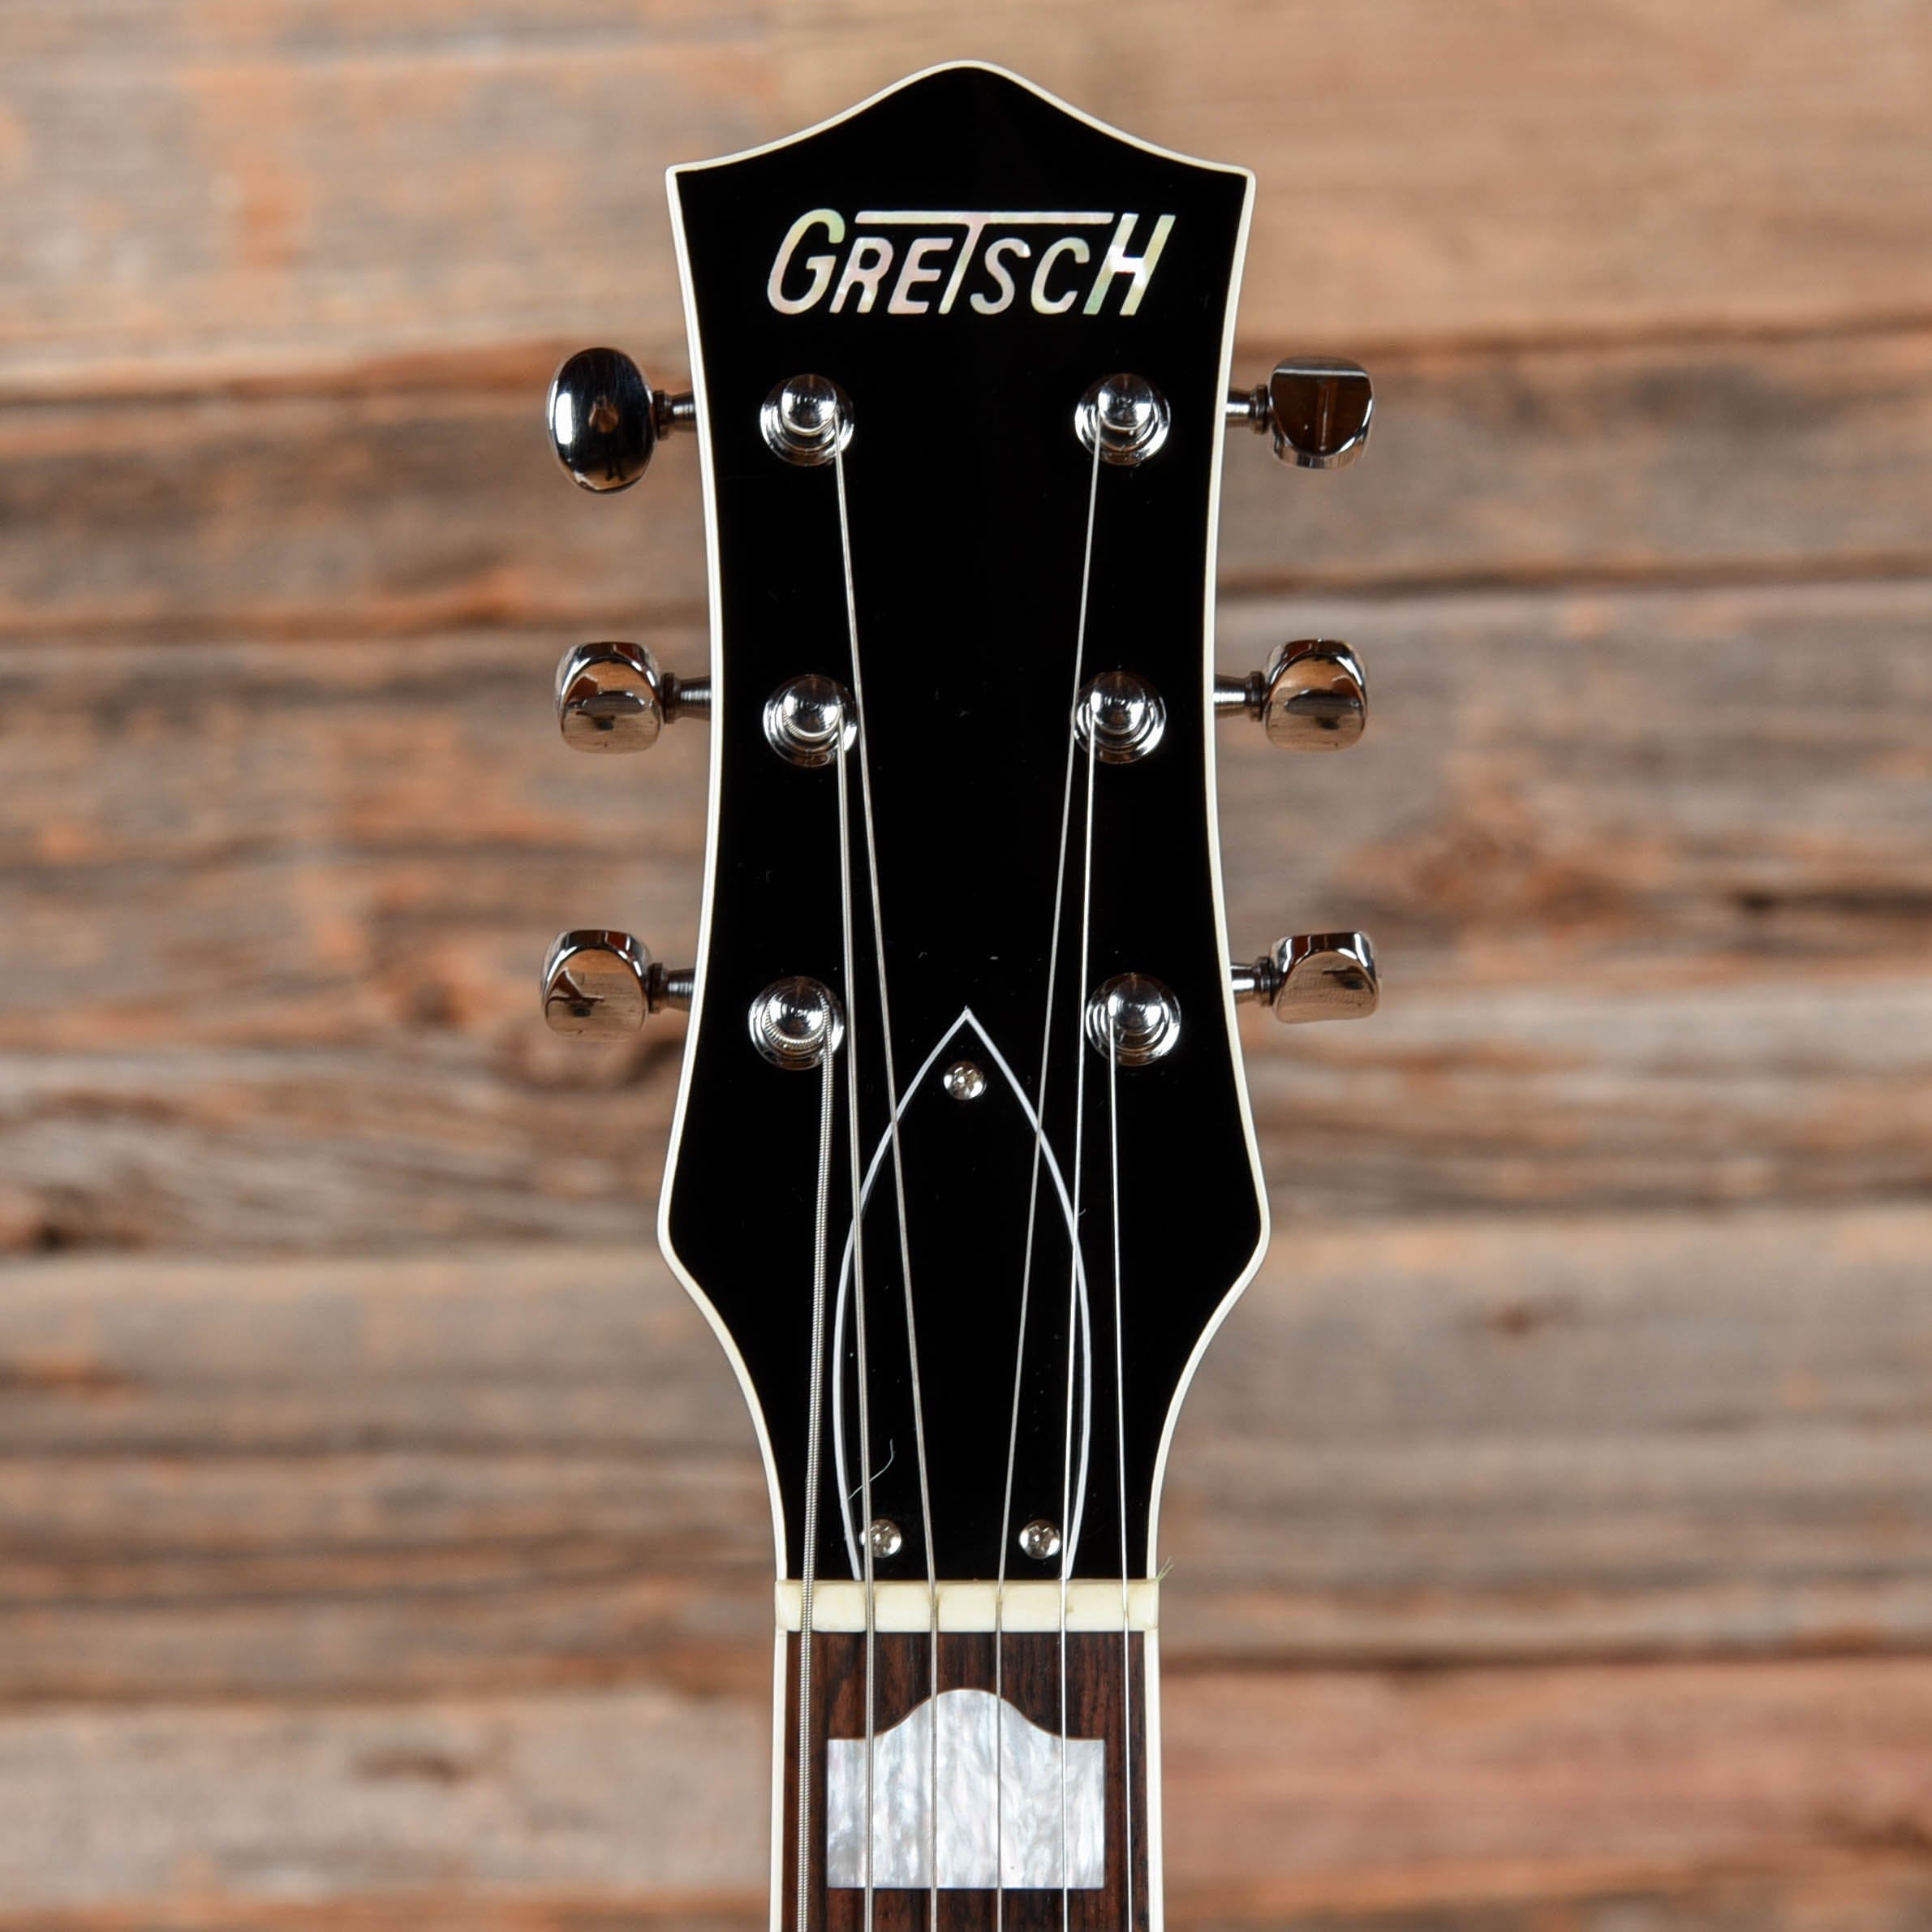 Gretsch G6128T-1957 Duo Jet Black 2005 Electric Guitars / Solid Body